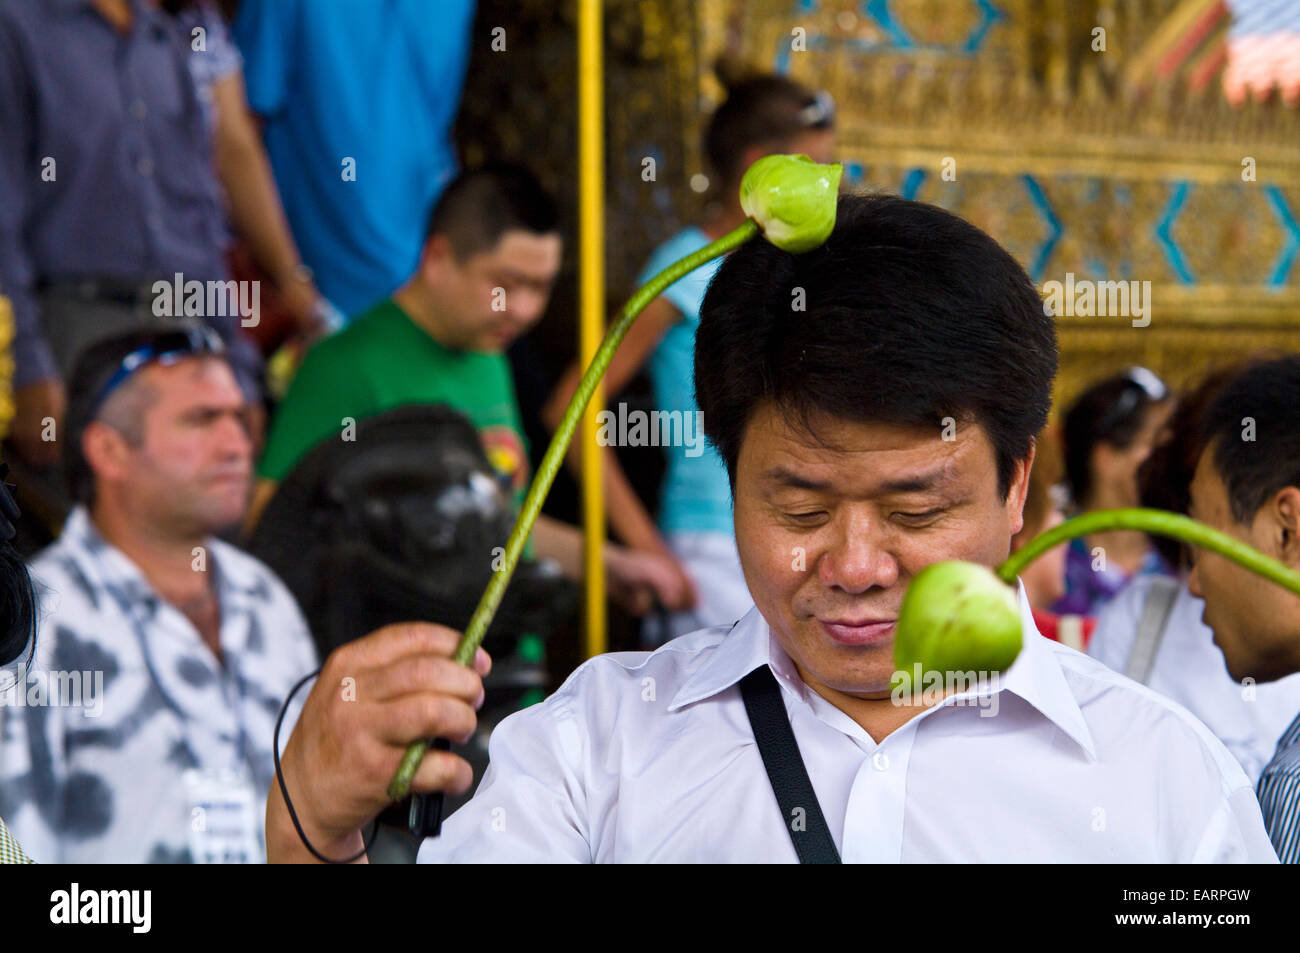 A worshipper says a prayer and touches his head with a flower bulb. Stock Photo